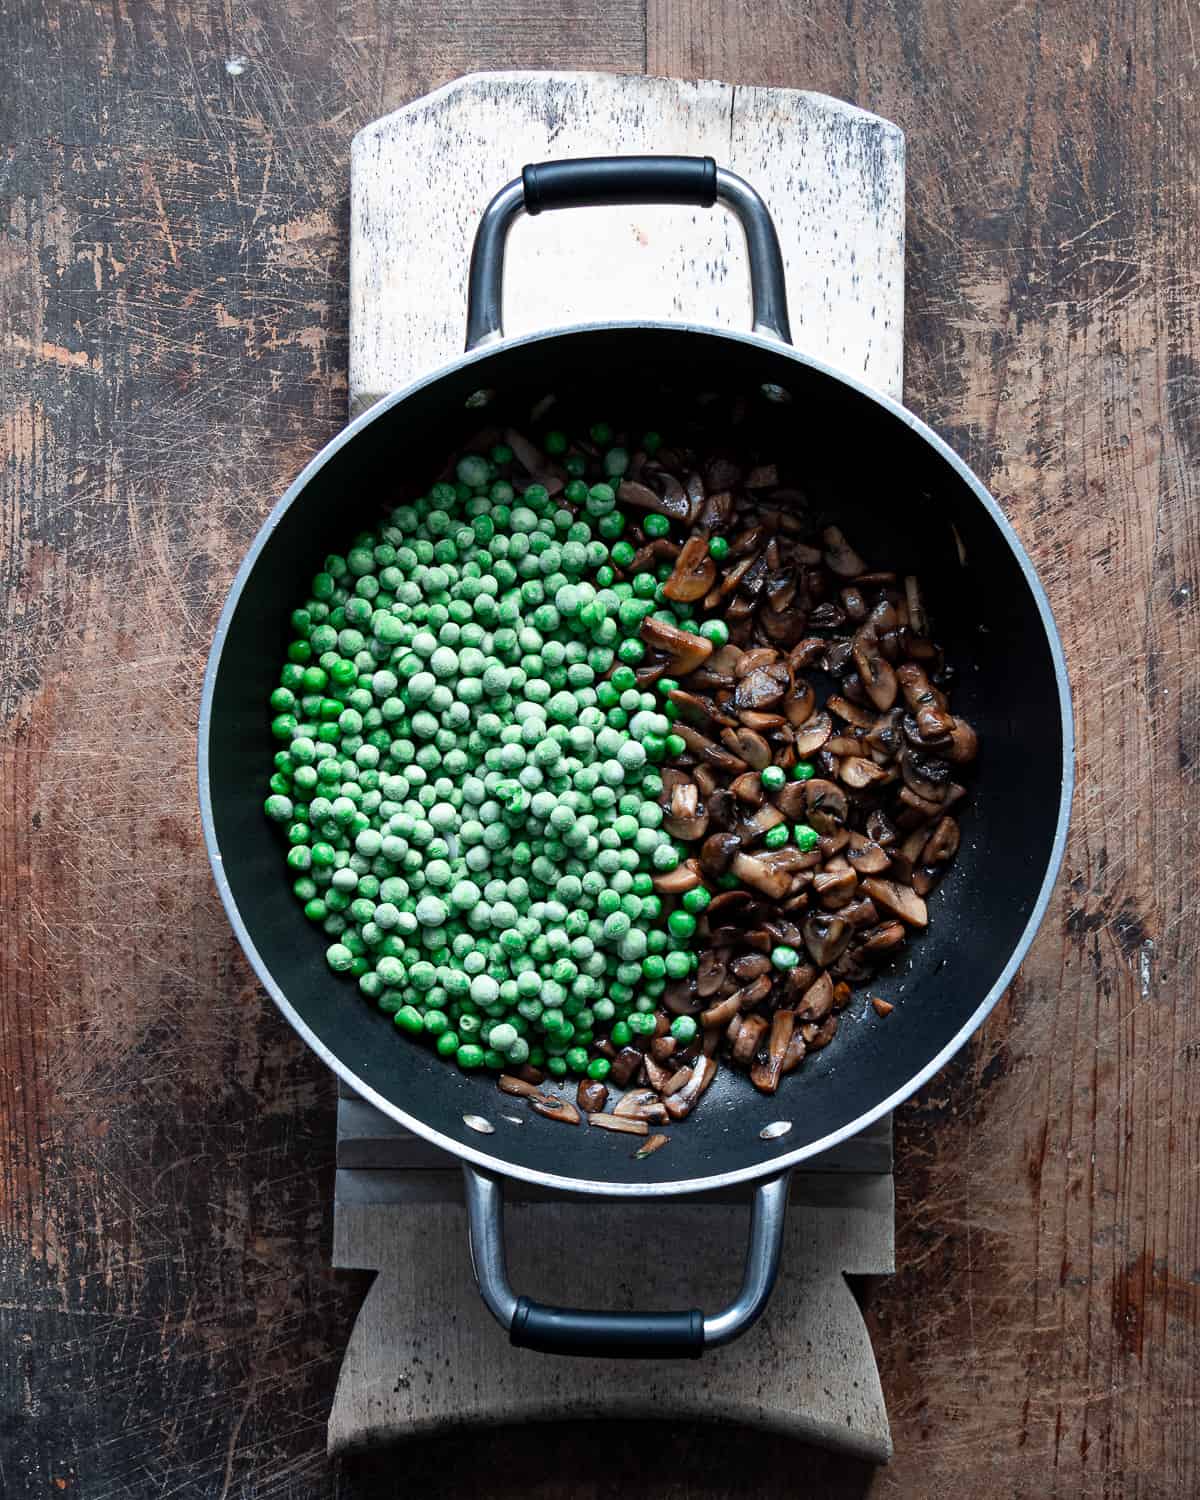  Sauteed mushrooms with peas on a frying pan